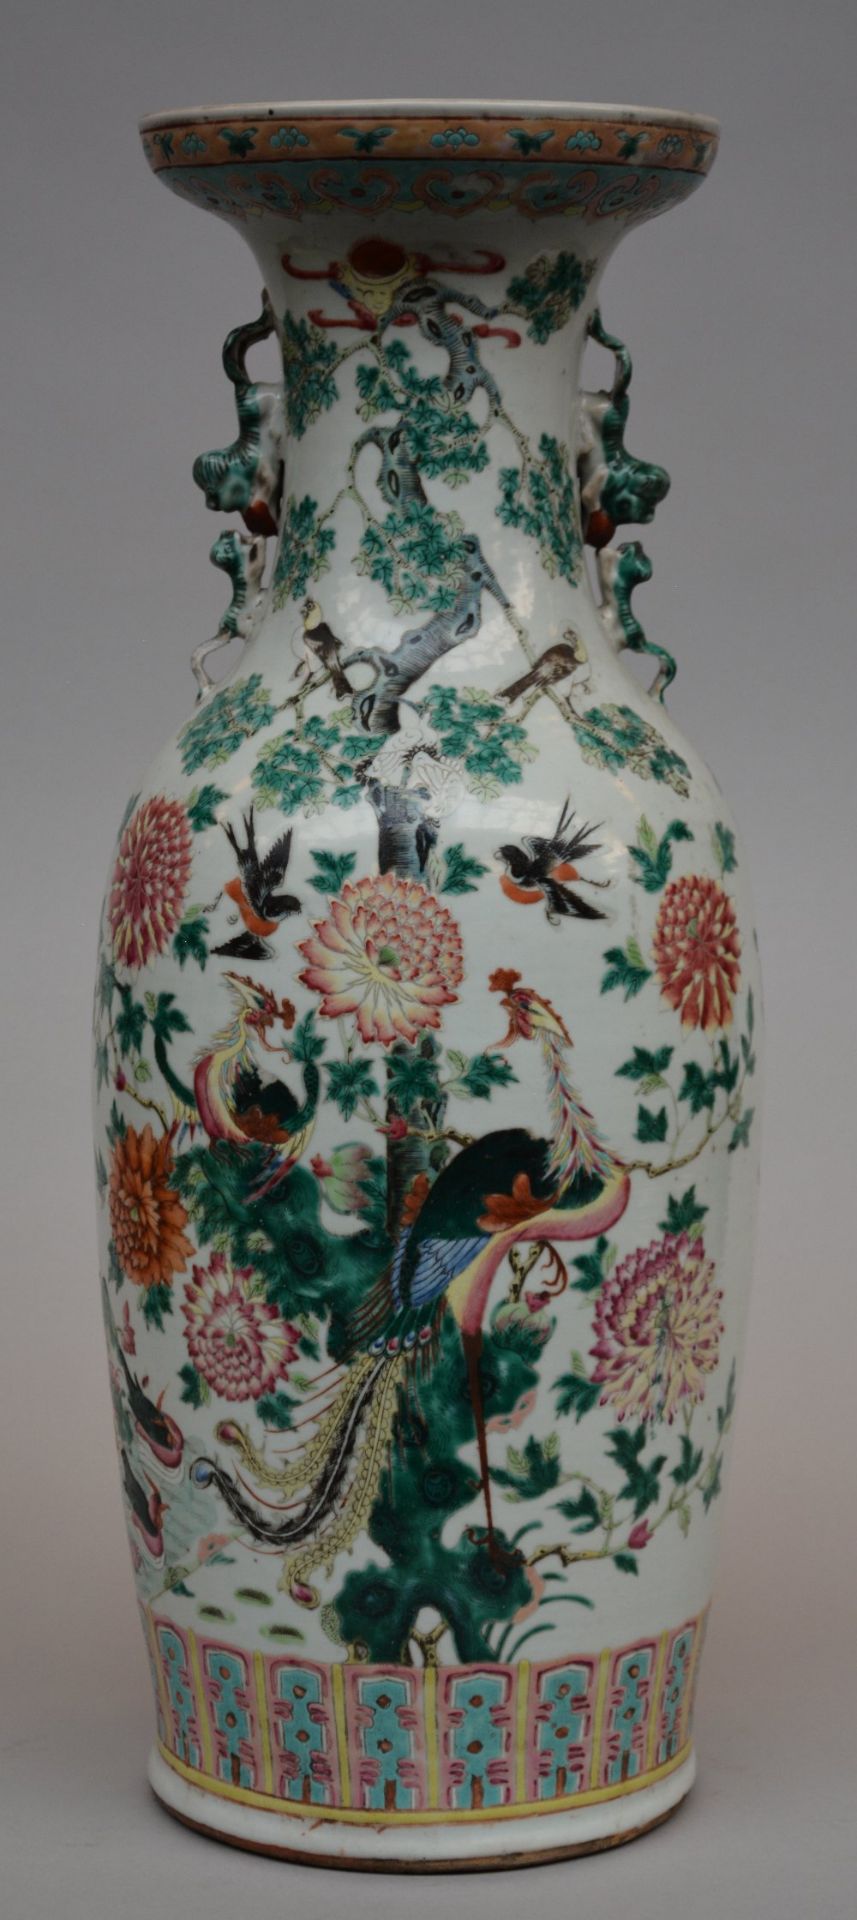 A Chinese polychrome vase, decorated with birds and flowers, 19thC, H 60,5 cm (damage on the